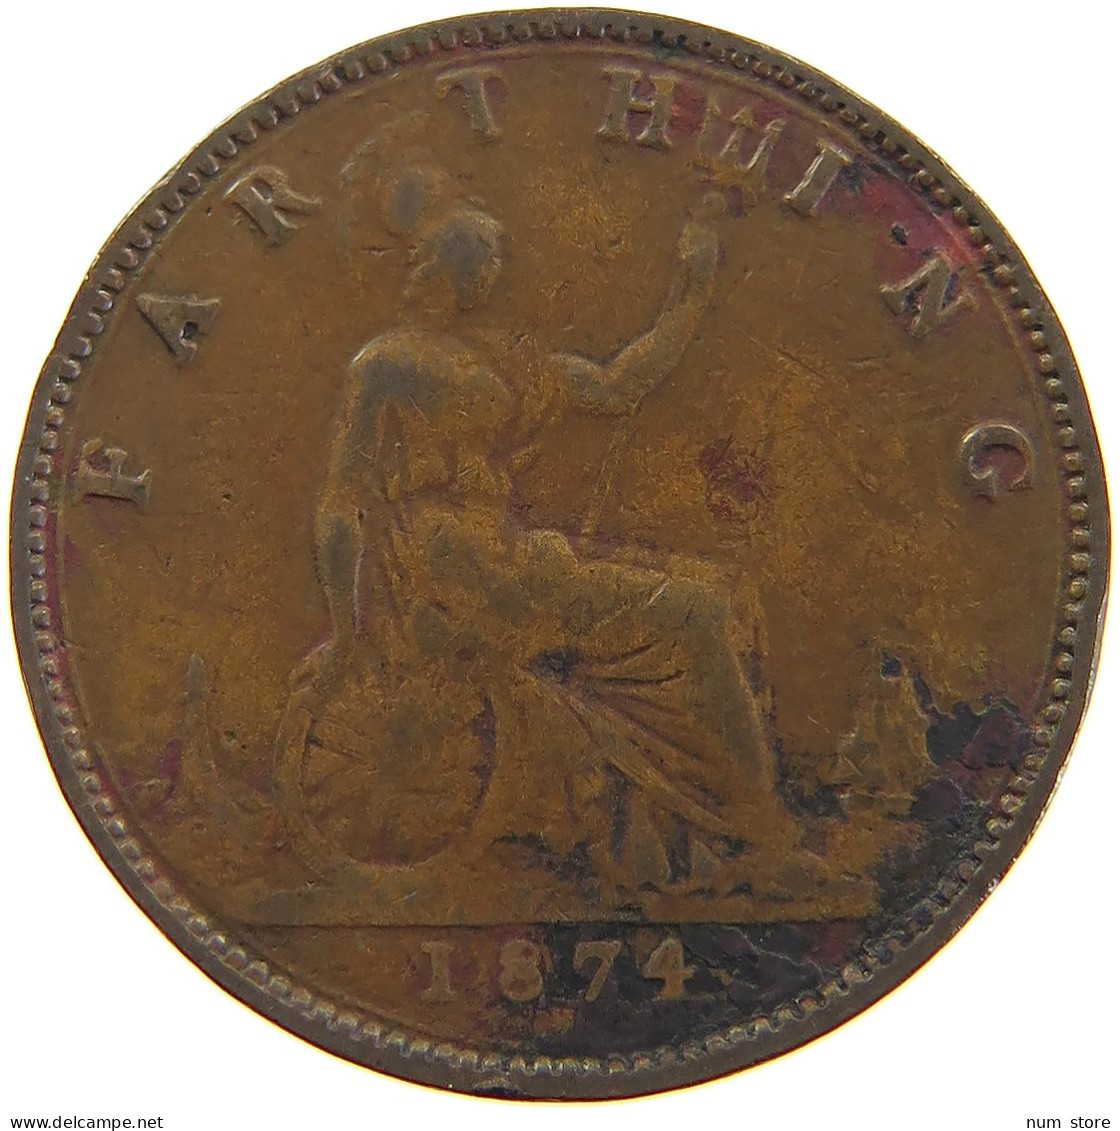 GREAT BRITAIN FARTHING 1874 H Victoria 1837-1901 #a066 0805 - B. 1 Farthing